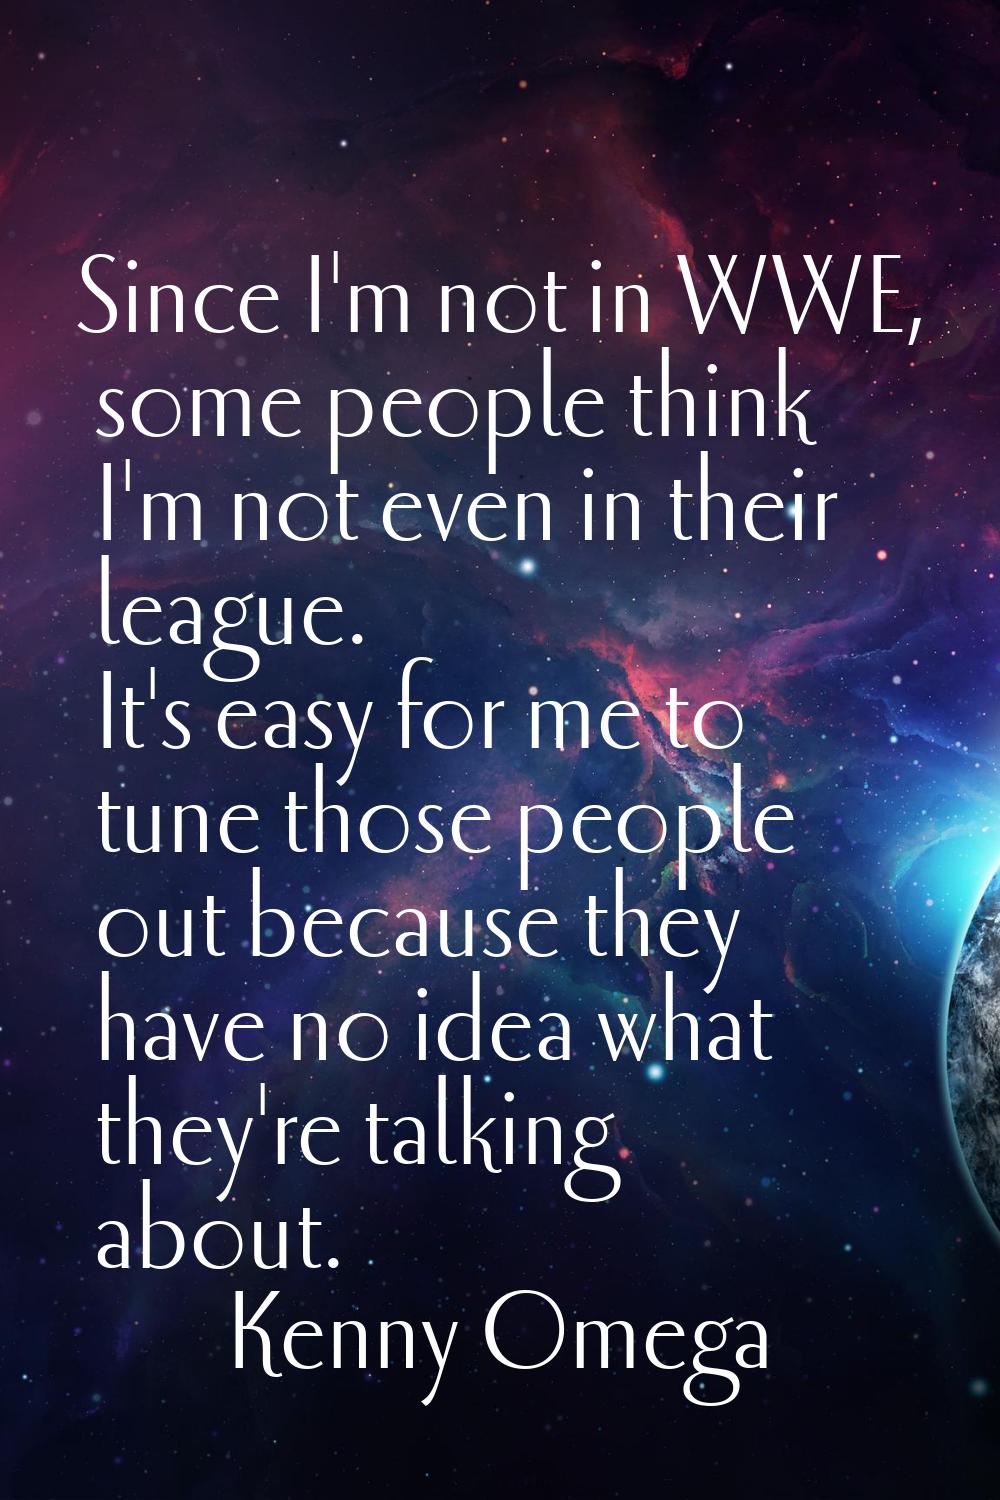 Since I'm not in WWE, some people think I'm not even in their league. It's easy for me to tune thos